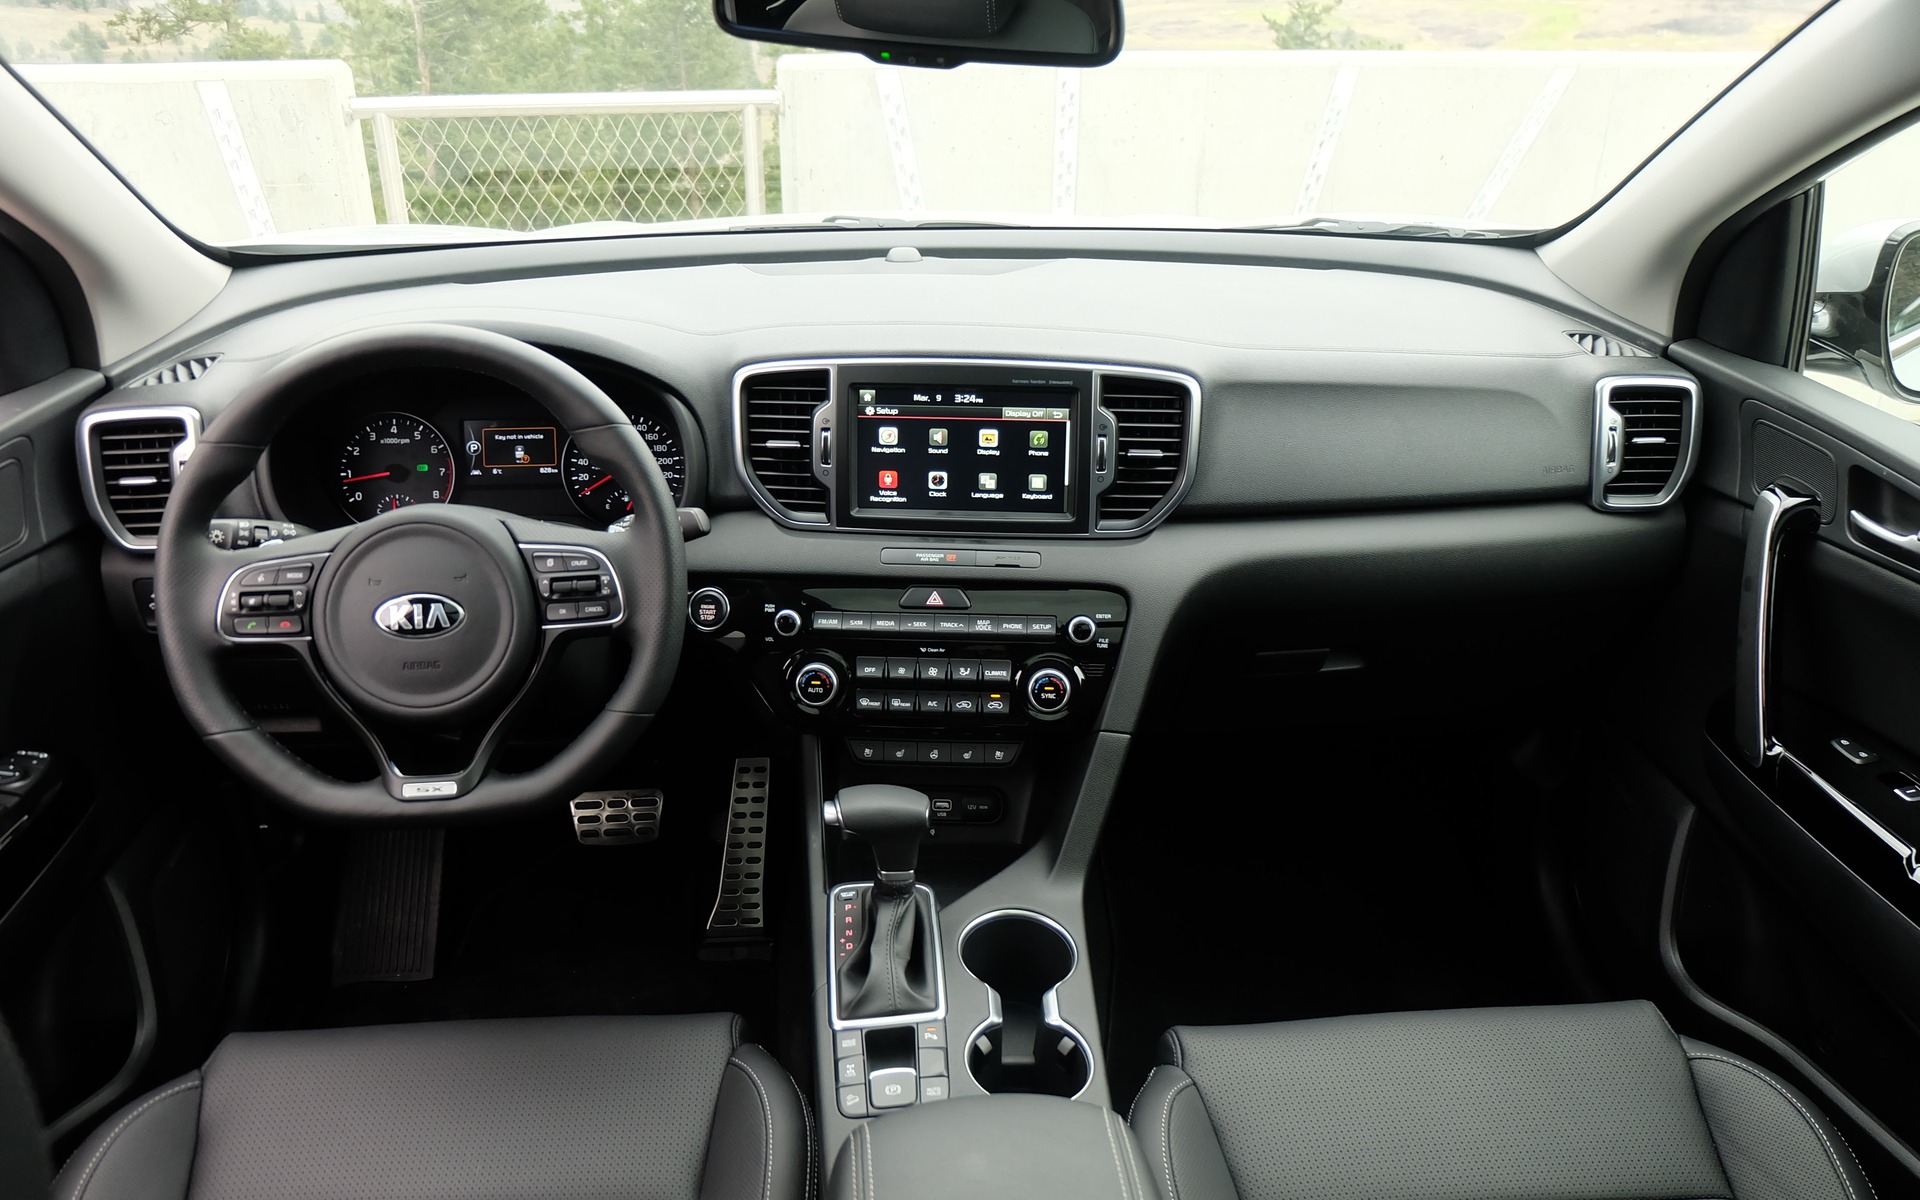 The 2017 Kia Sportage’s cabin is well laid out and is good quality.